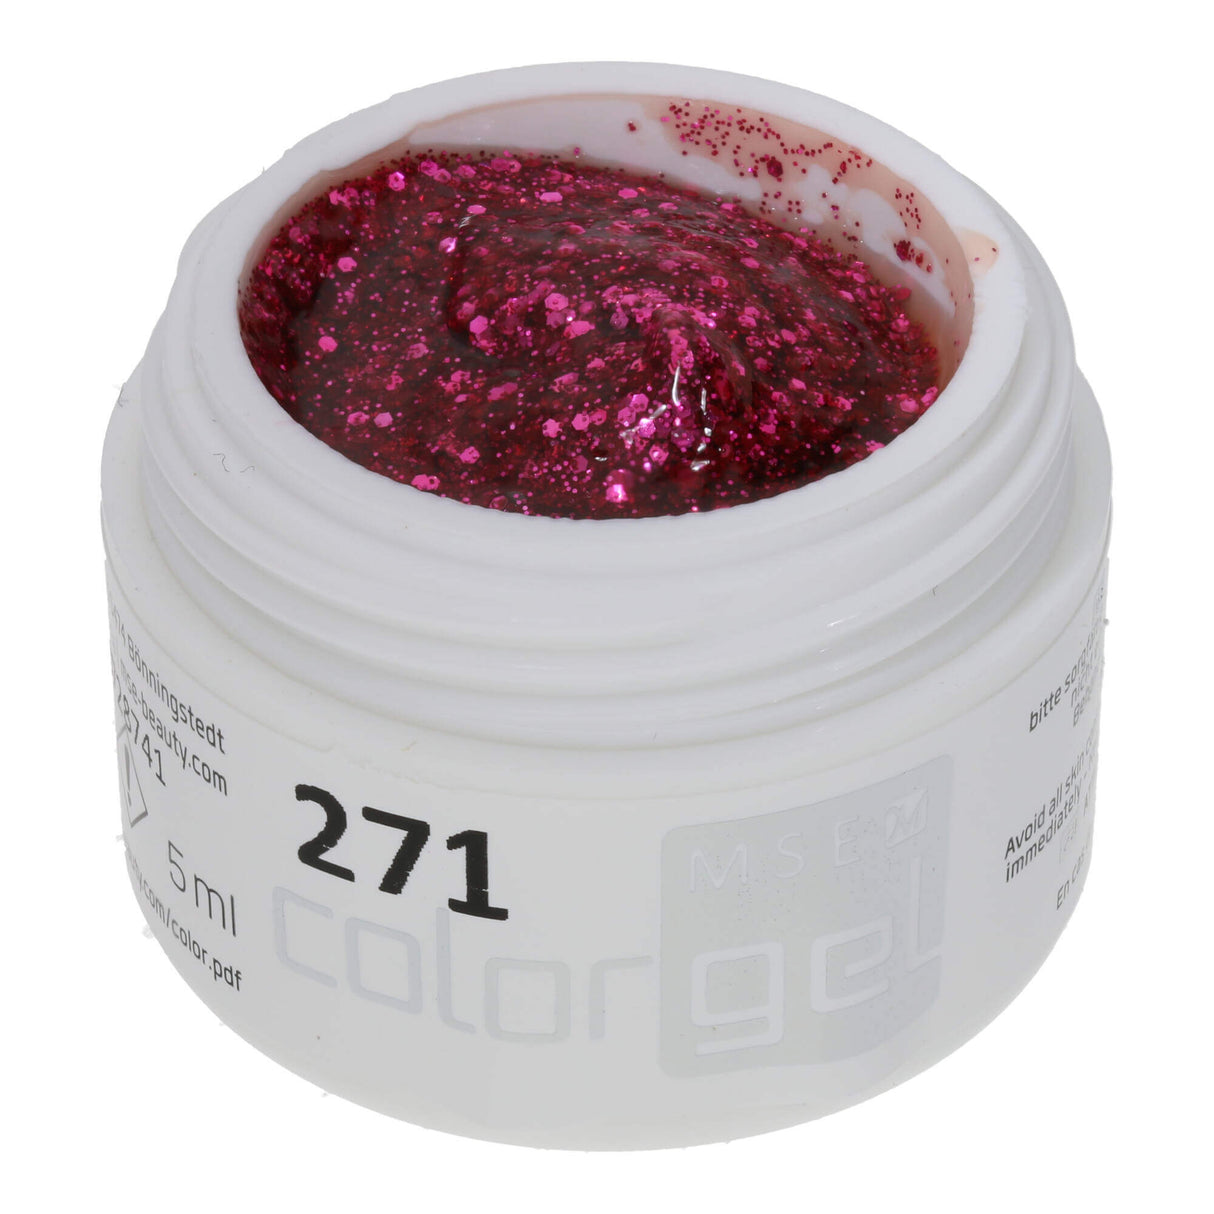 # 271 Premium-GLITTER Color Gel 5ml Clear gel with pink glitter in different sizes